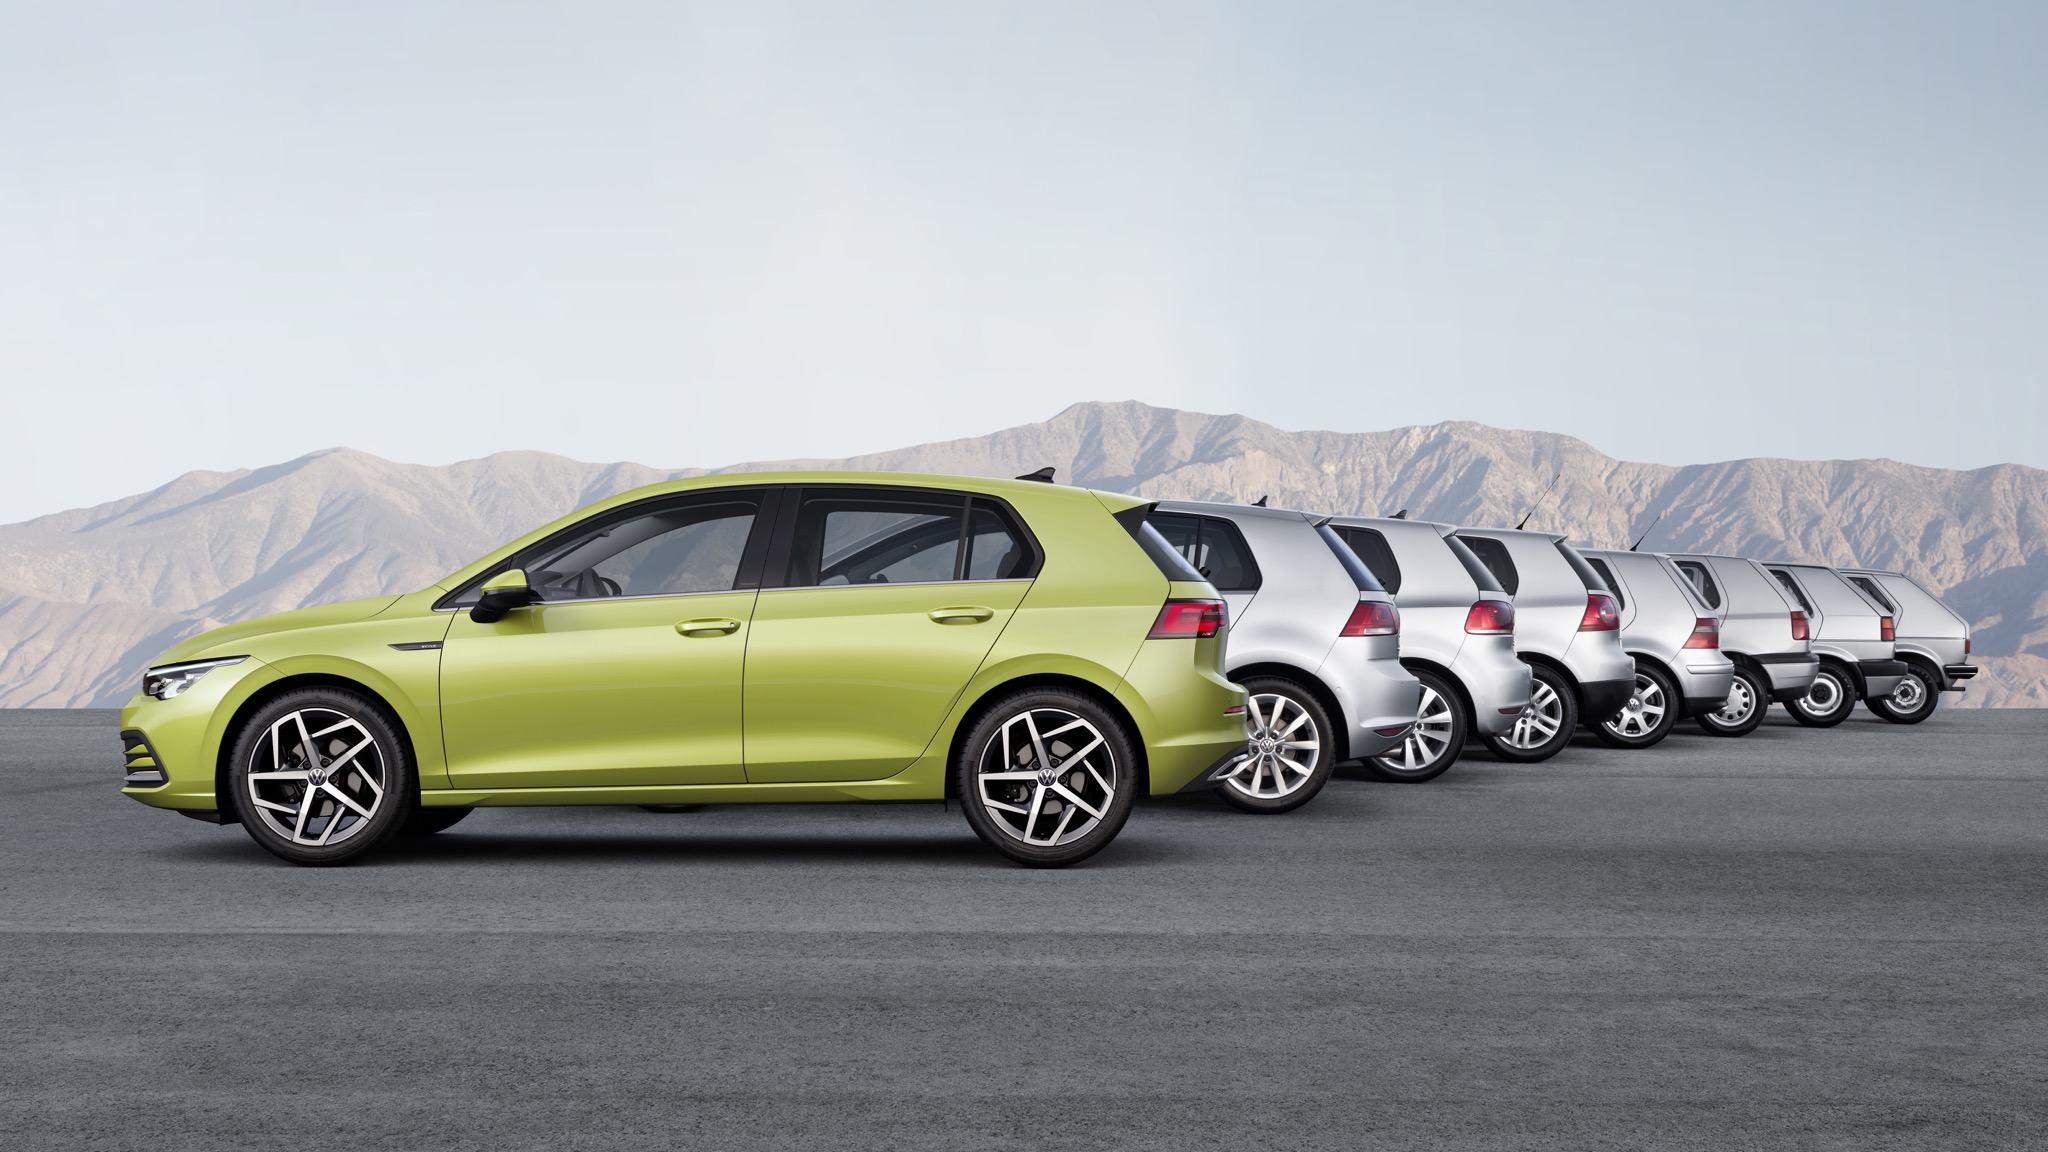 Eight things you need to know about the new Volkswagen Golf